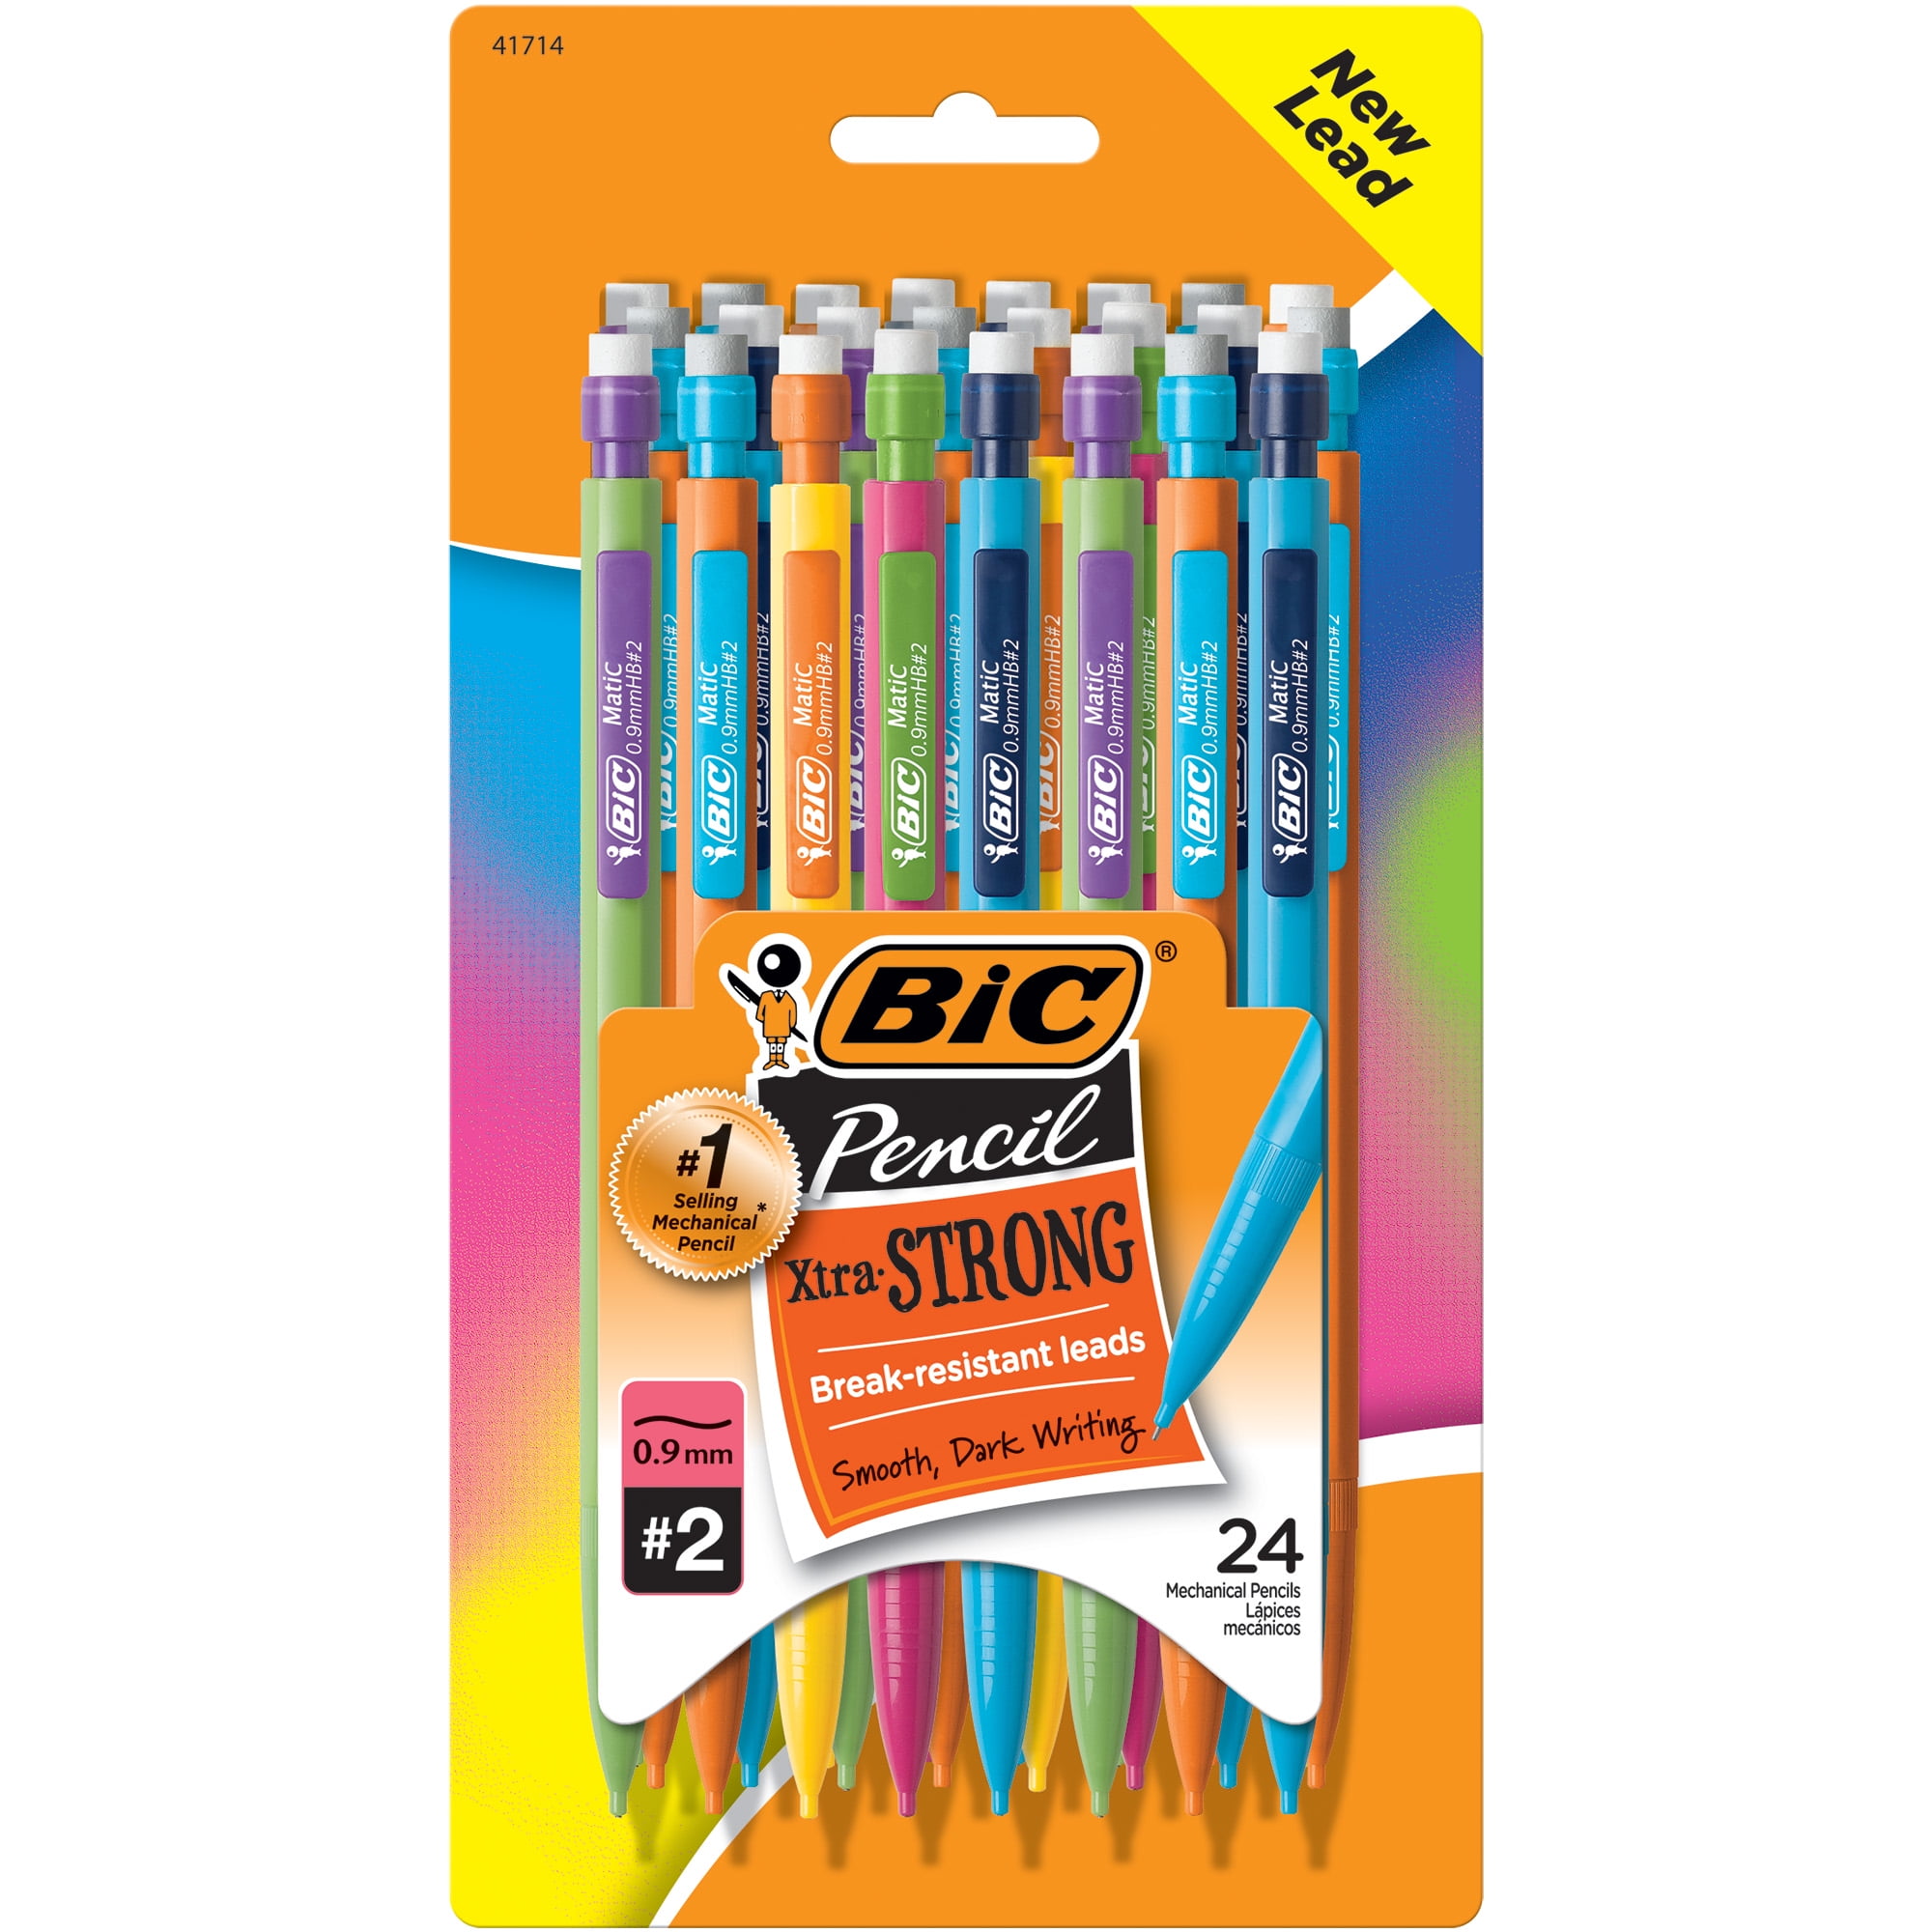 Thick Point Colorful Barrel 24-Count New Xtra-Strong Mechanical Pencil 0.9mm 